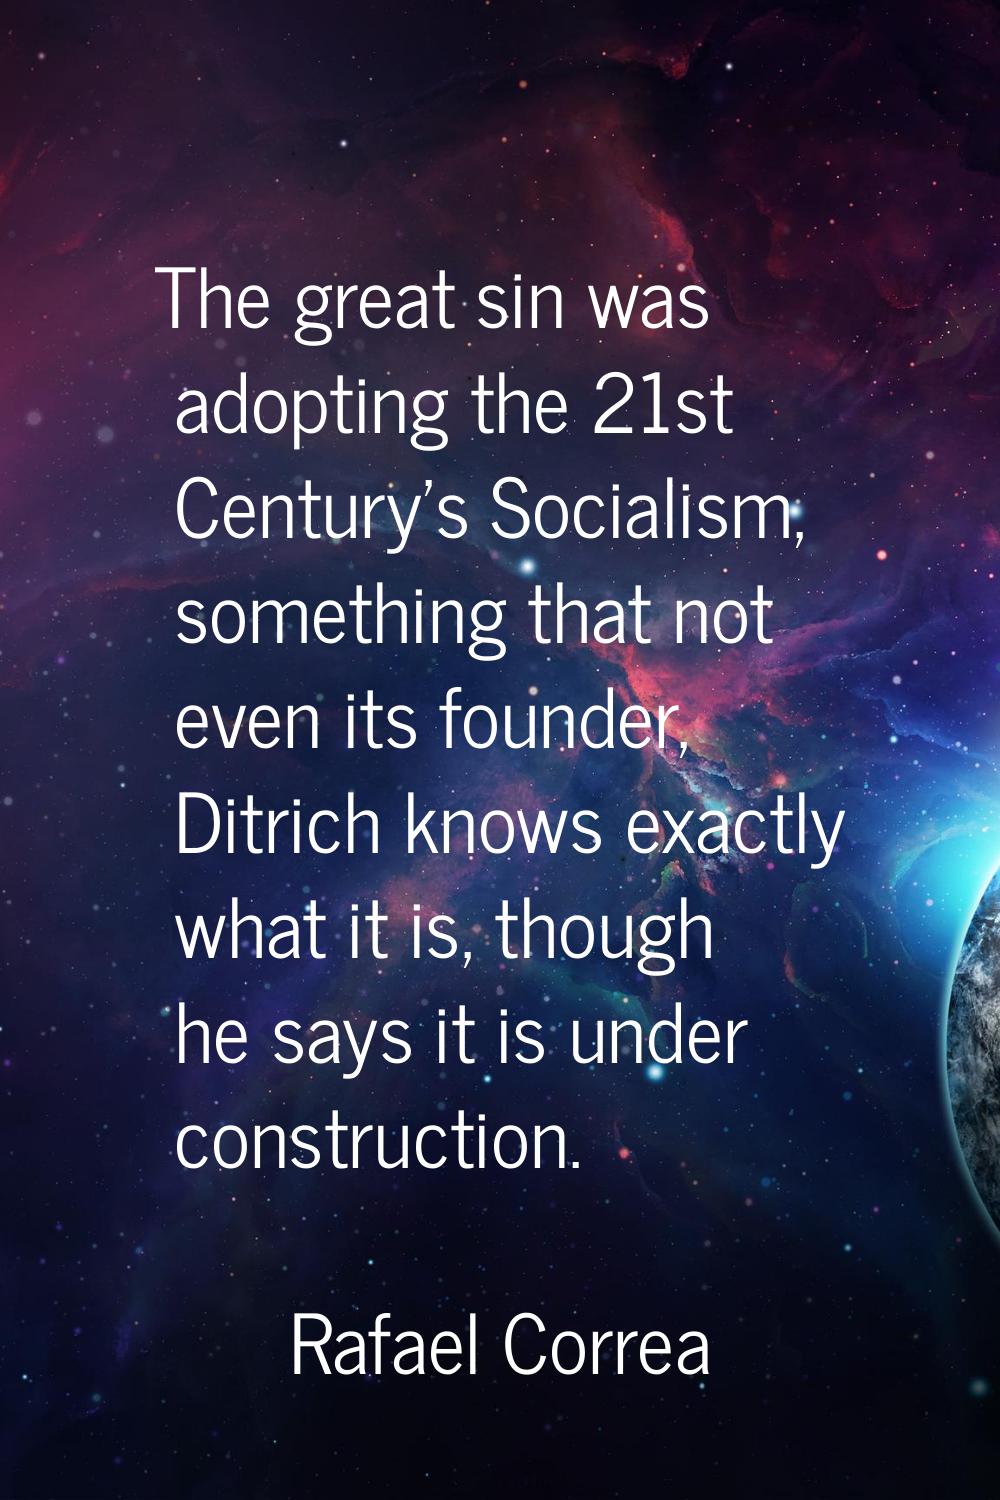 The great sin was adopting the 21st Century's Socialism, something that not even its founder, Ditri